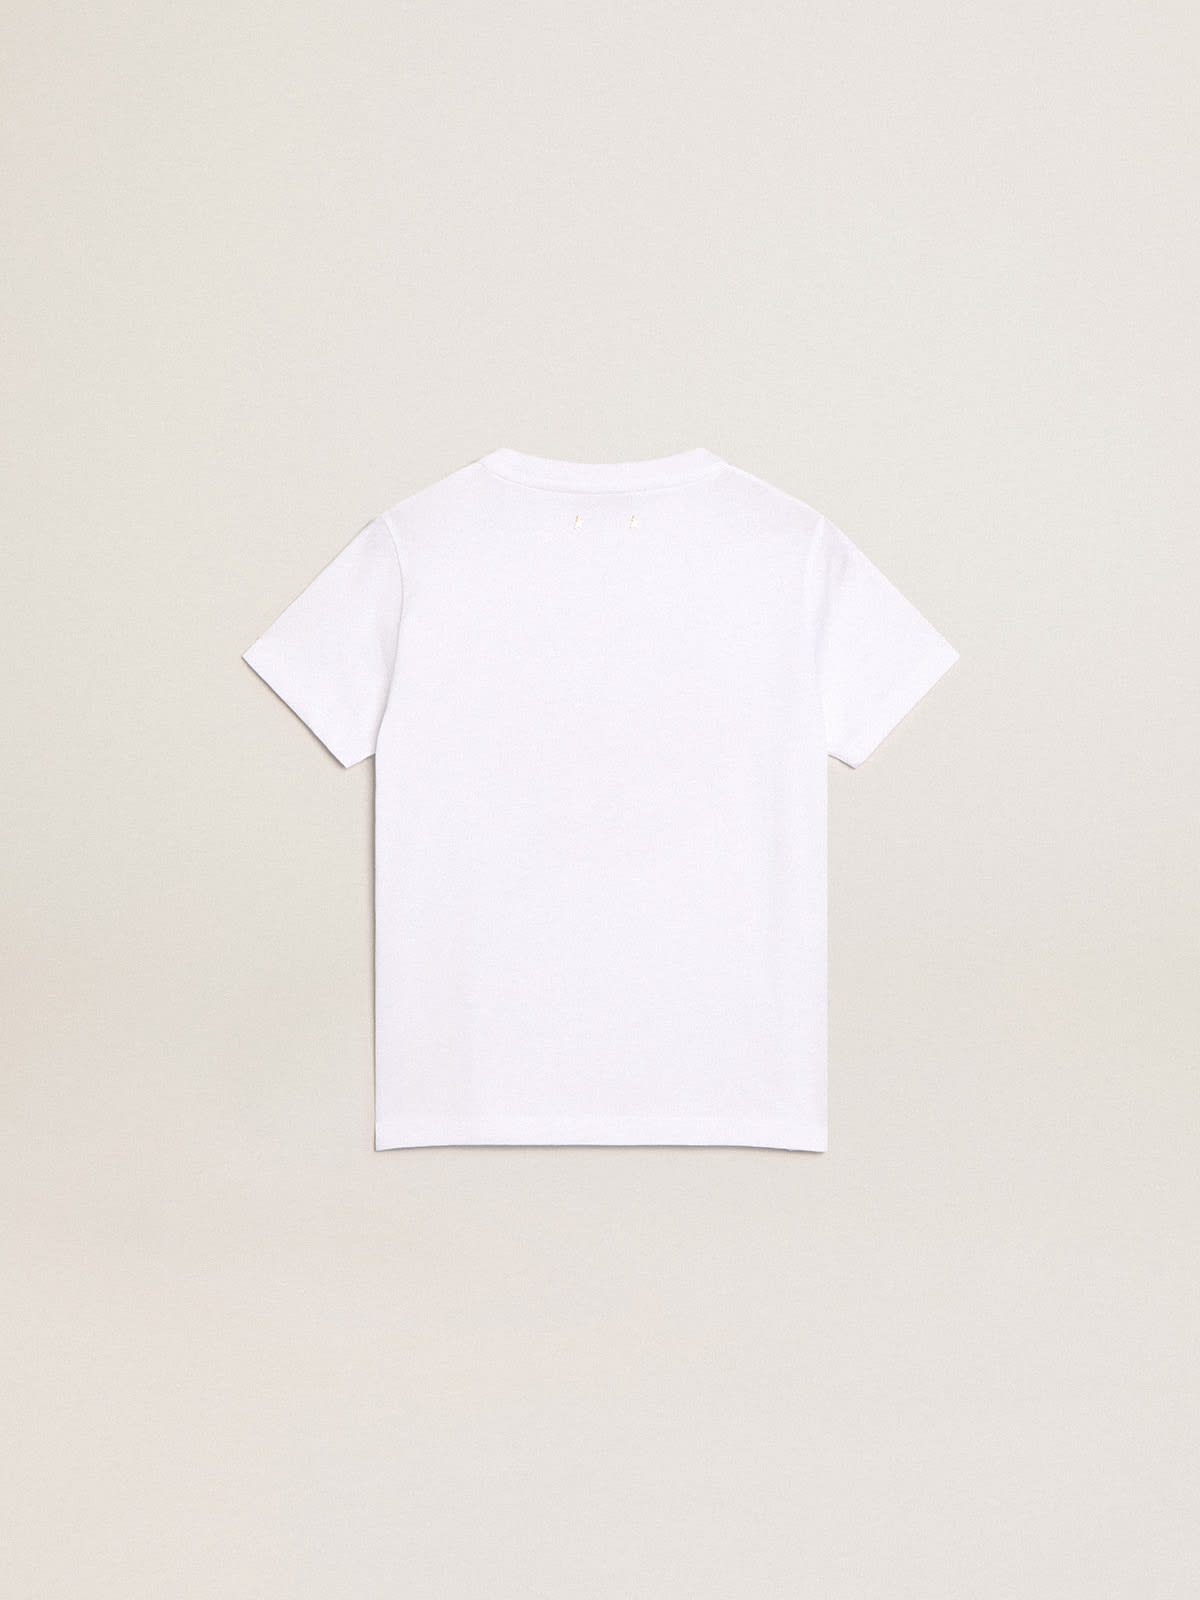 Golden Goose - Boys’ white T-shirt with printed red logo in the center in 